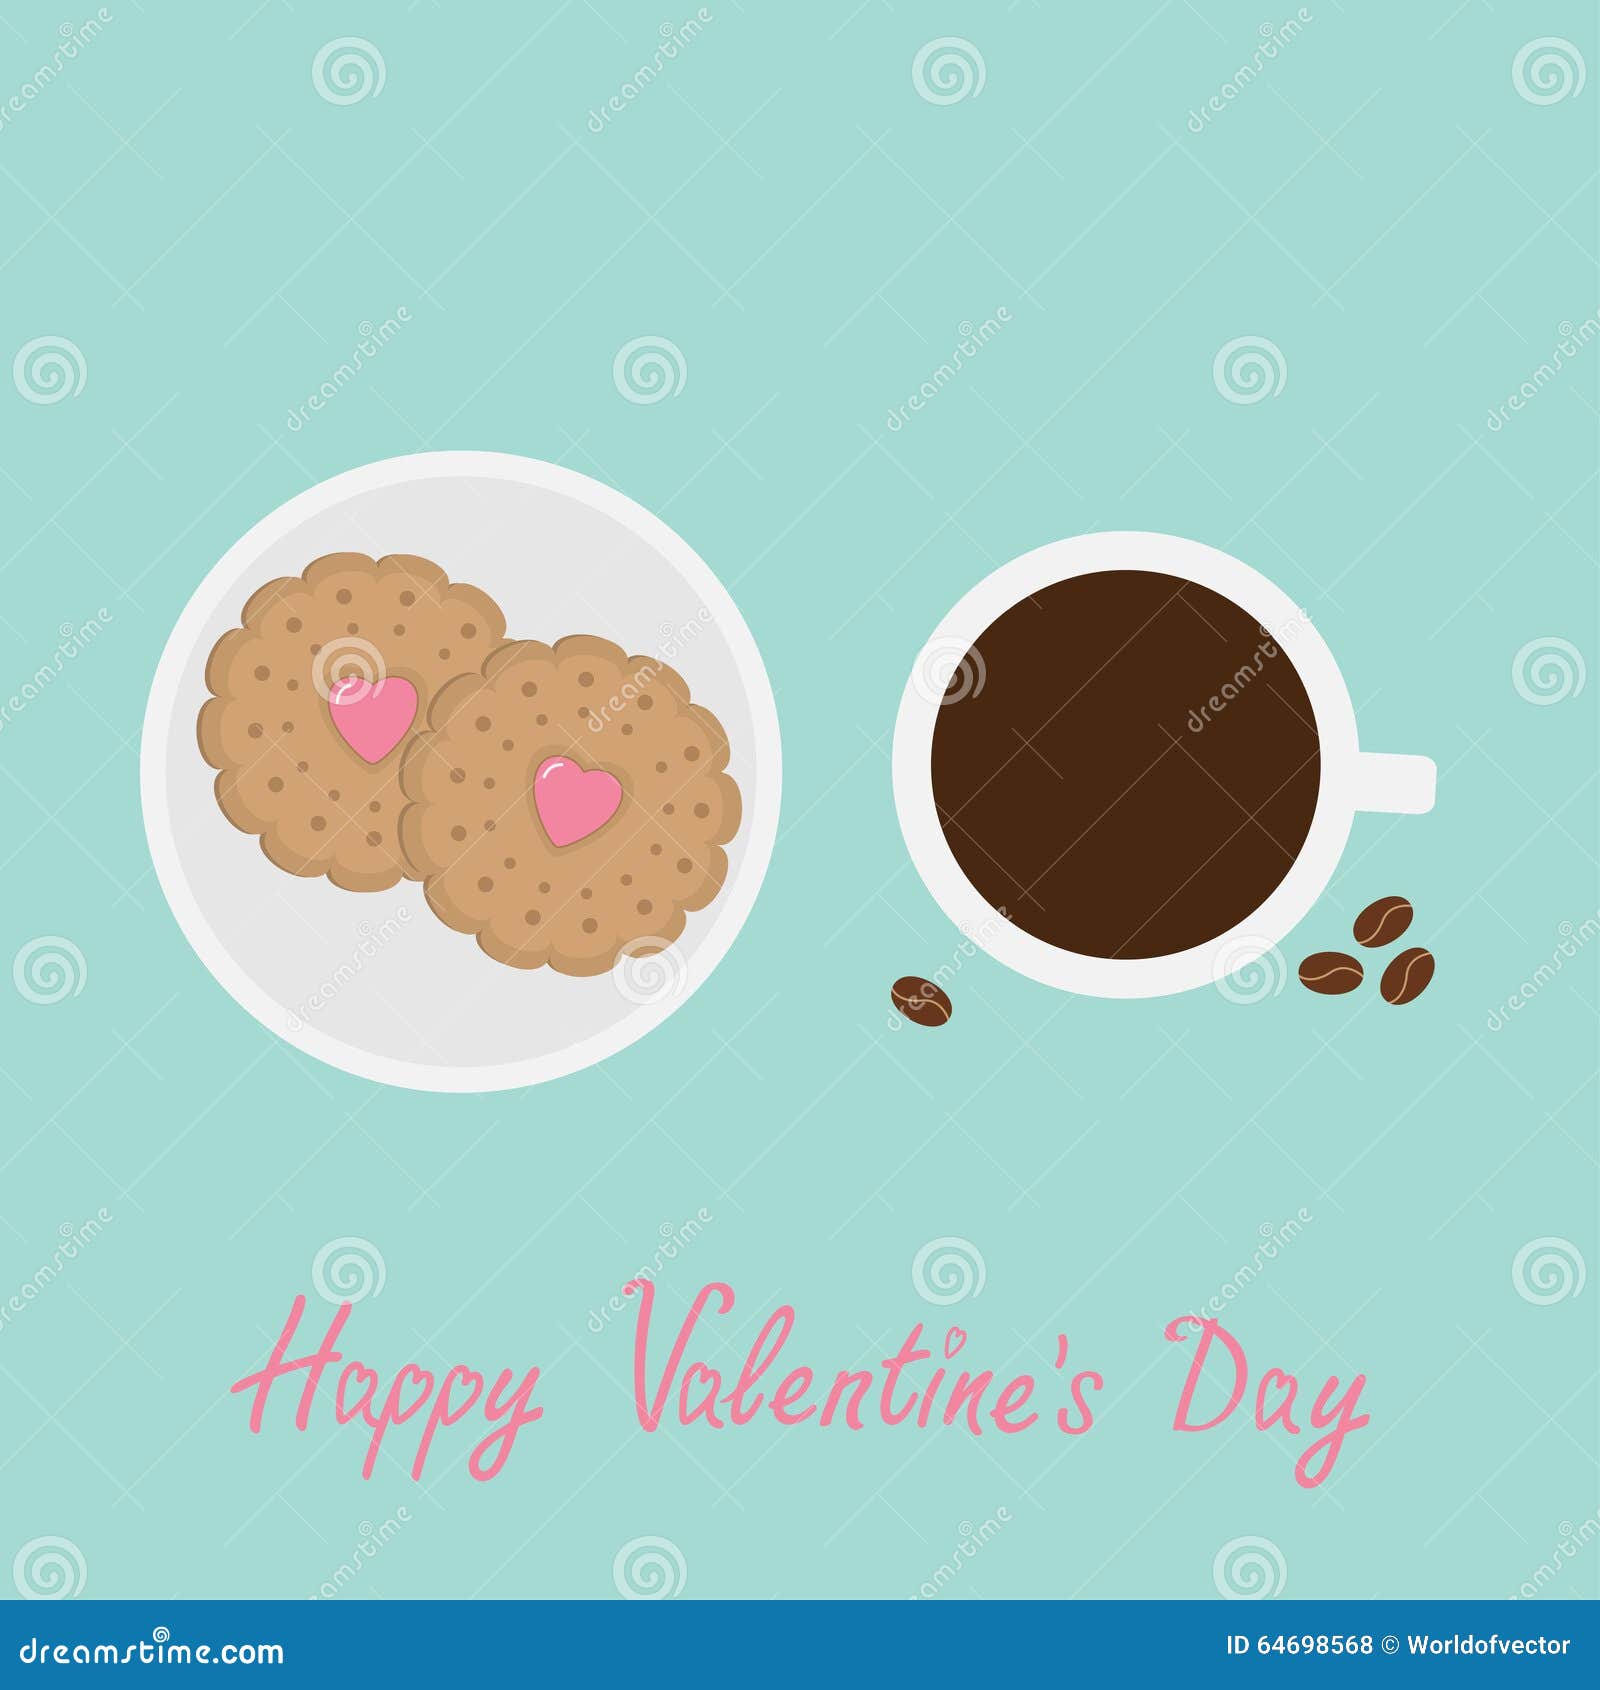 Biscuit Cookie Cracker with Pink Heart on the Plate Cup of Coffee, Beans.  Happy Valentines Day. Flat Design Stock Vector - Illustration of crispy,  dessert: 64698568